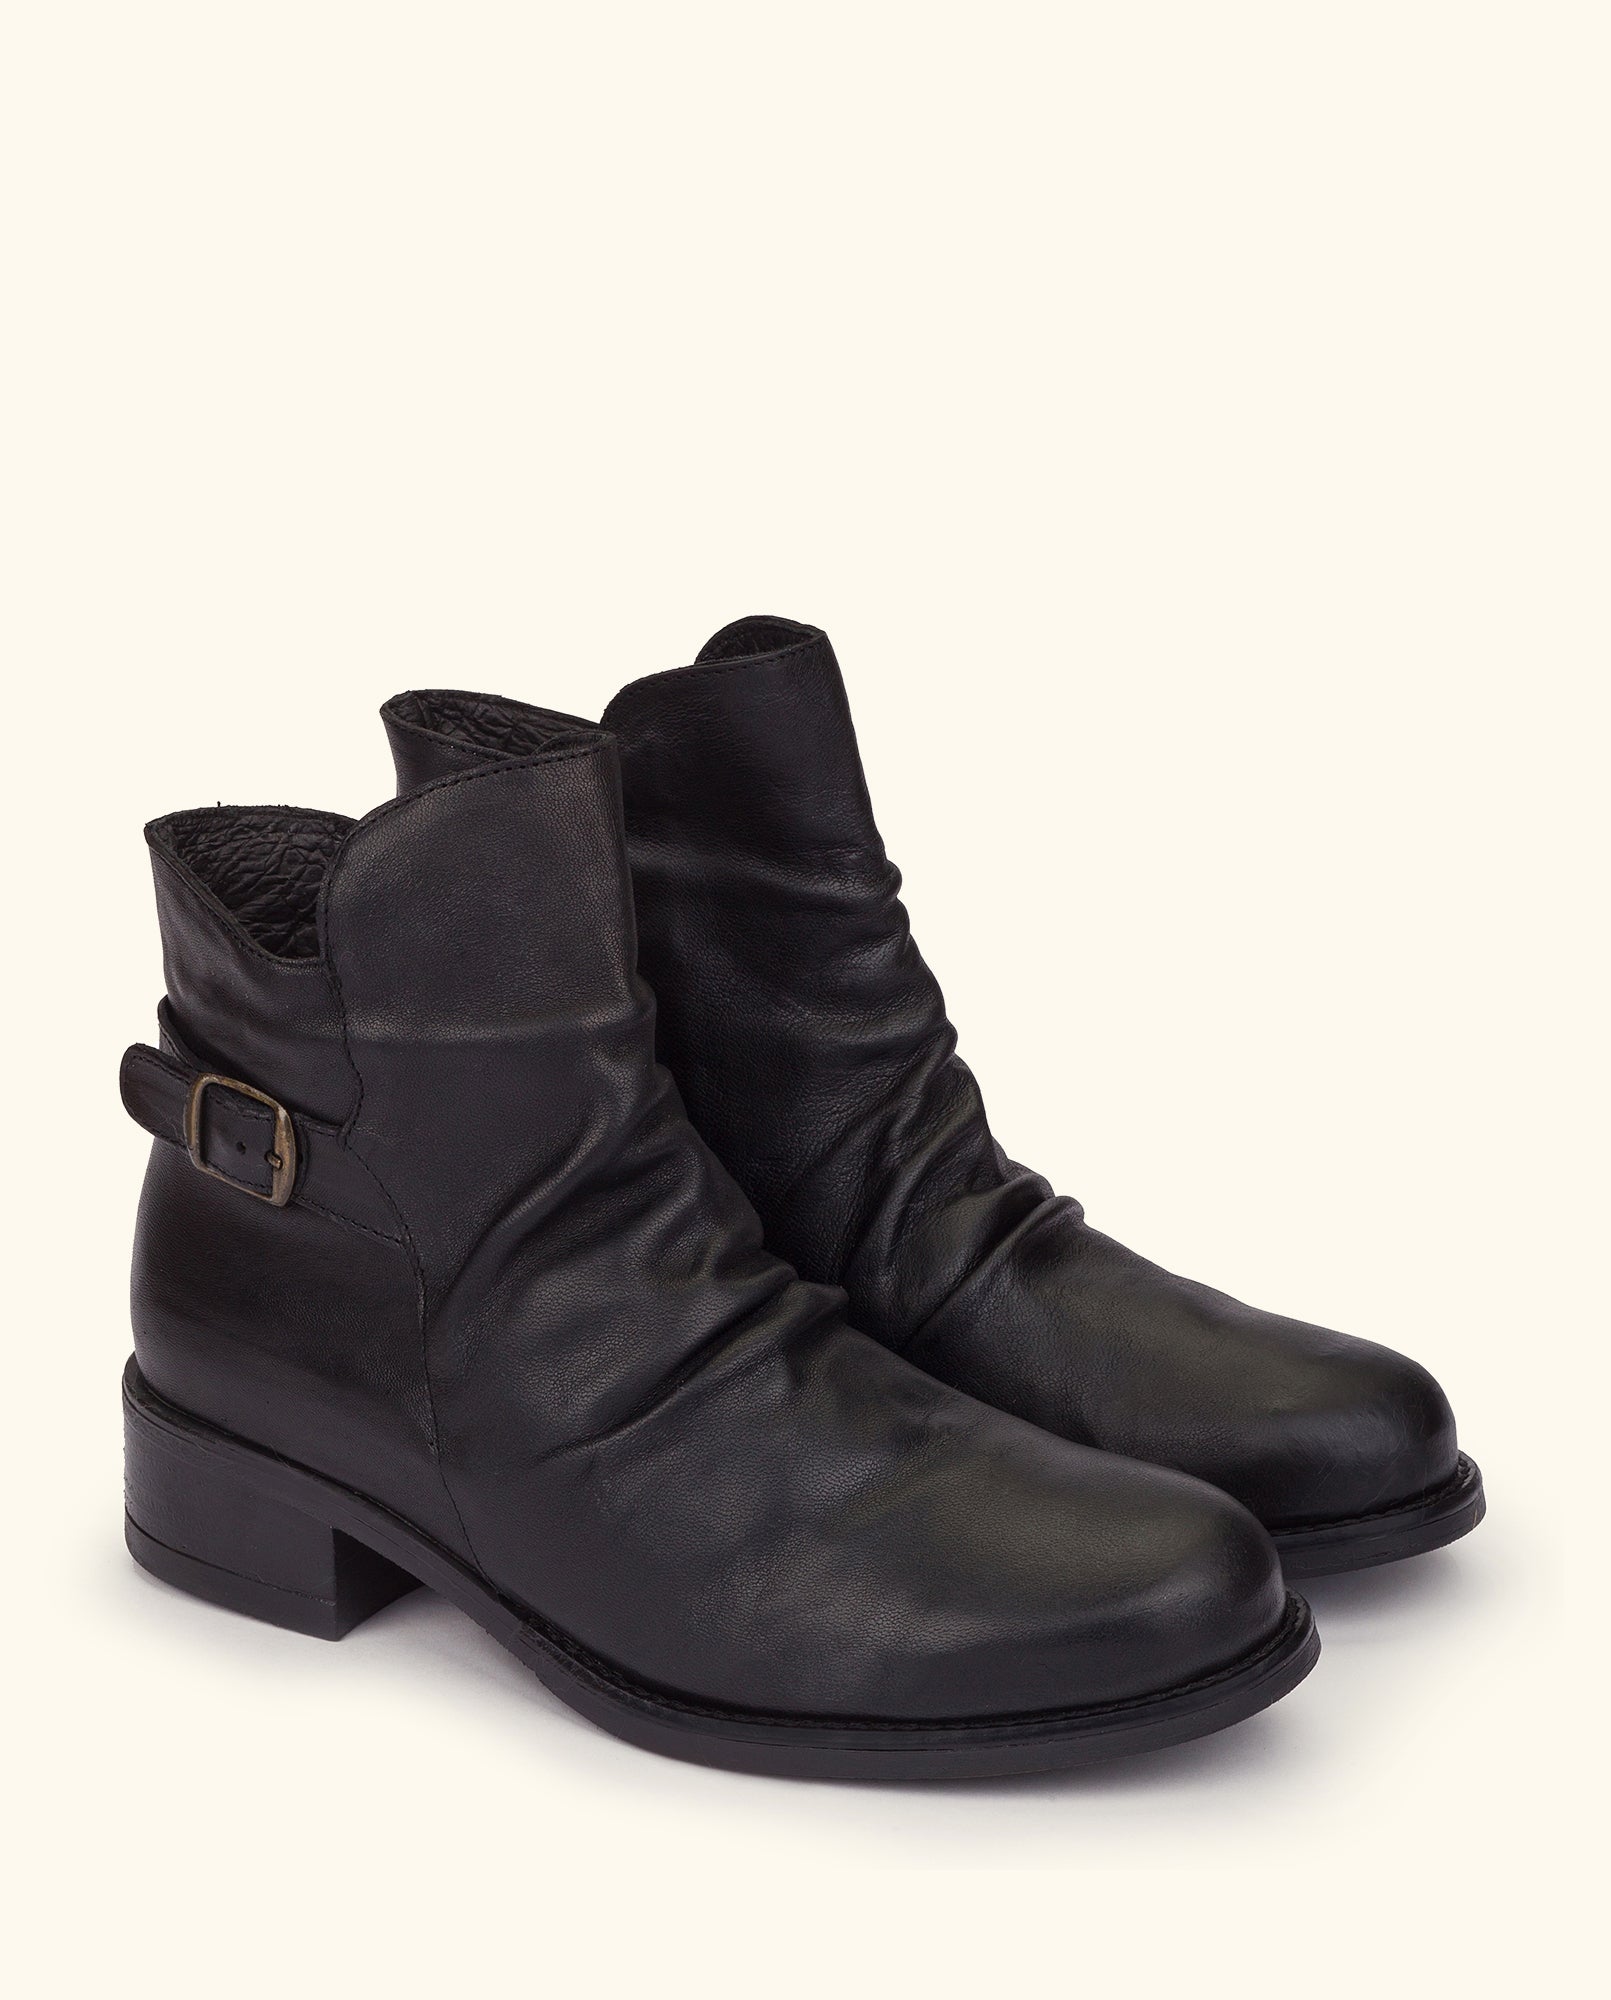 Flat ankle boot MONS-002 black